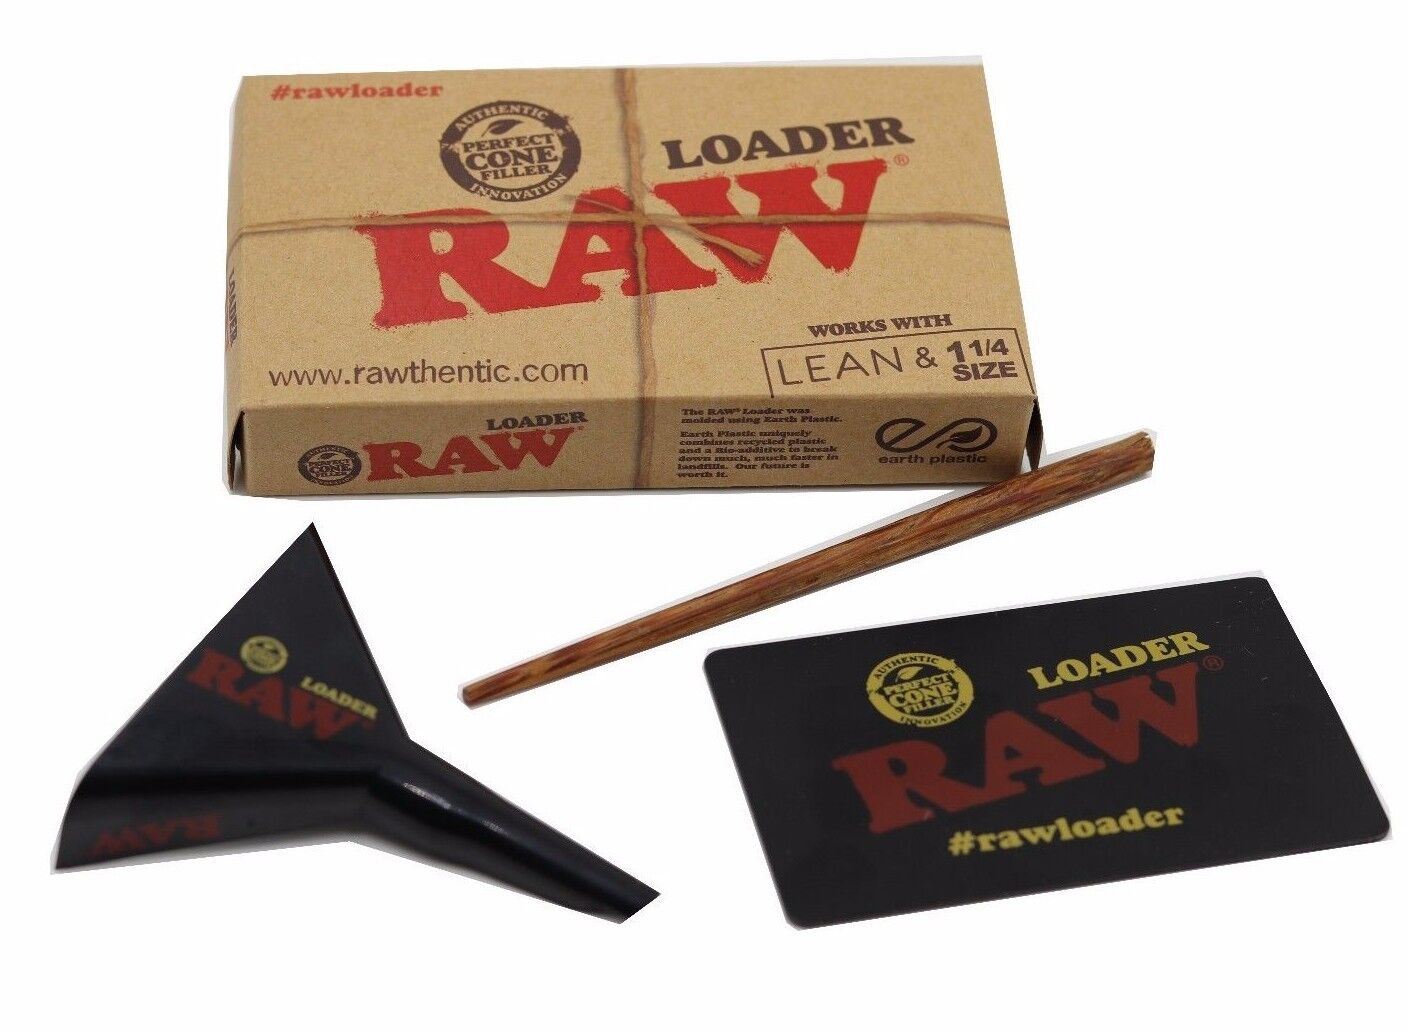 NEW RAW LEAN and 1 1/4 Size CONE LOADER with Scraping Card and Bamboo Poker